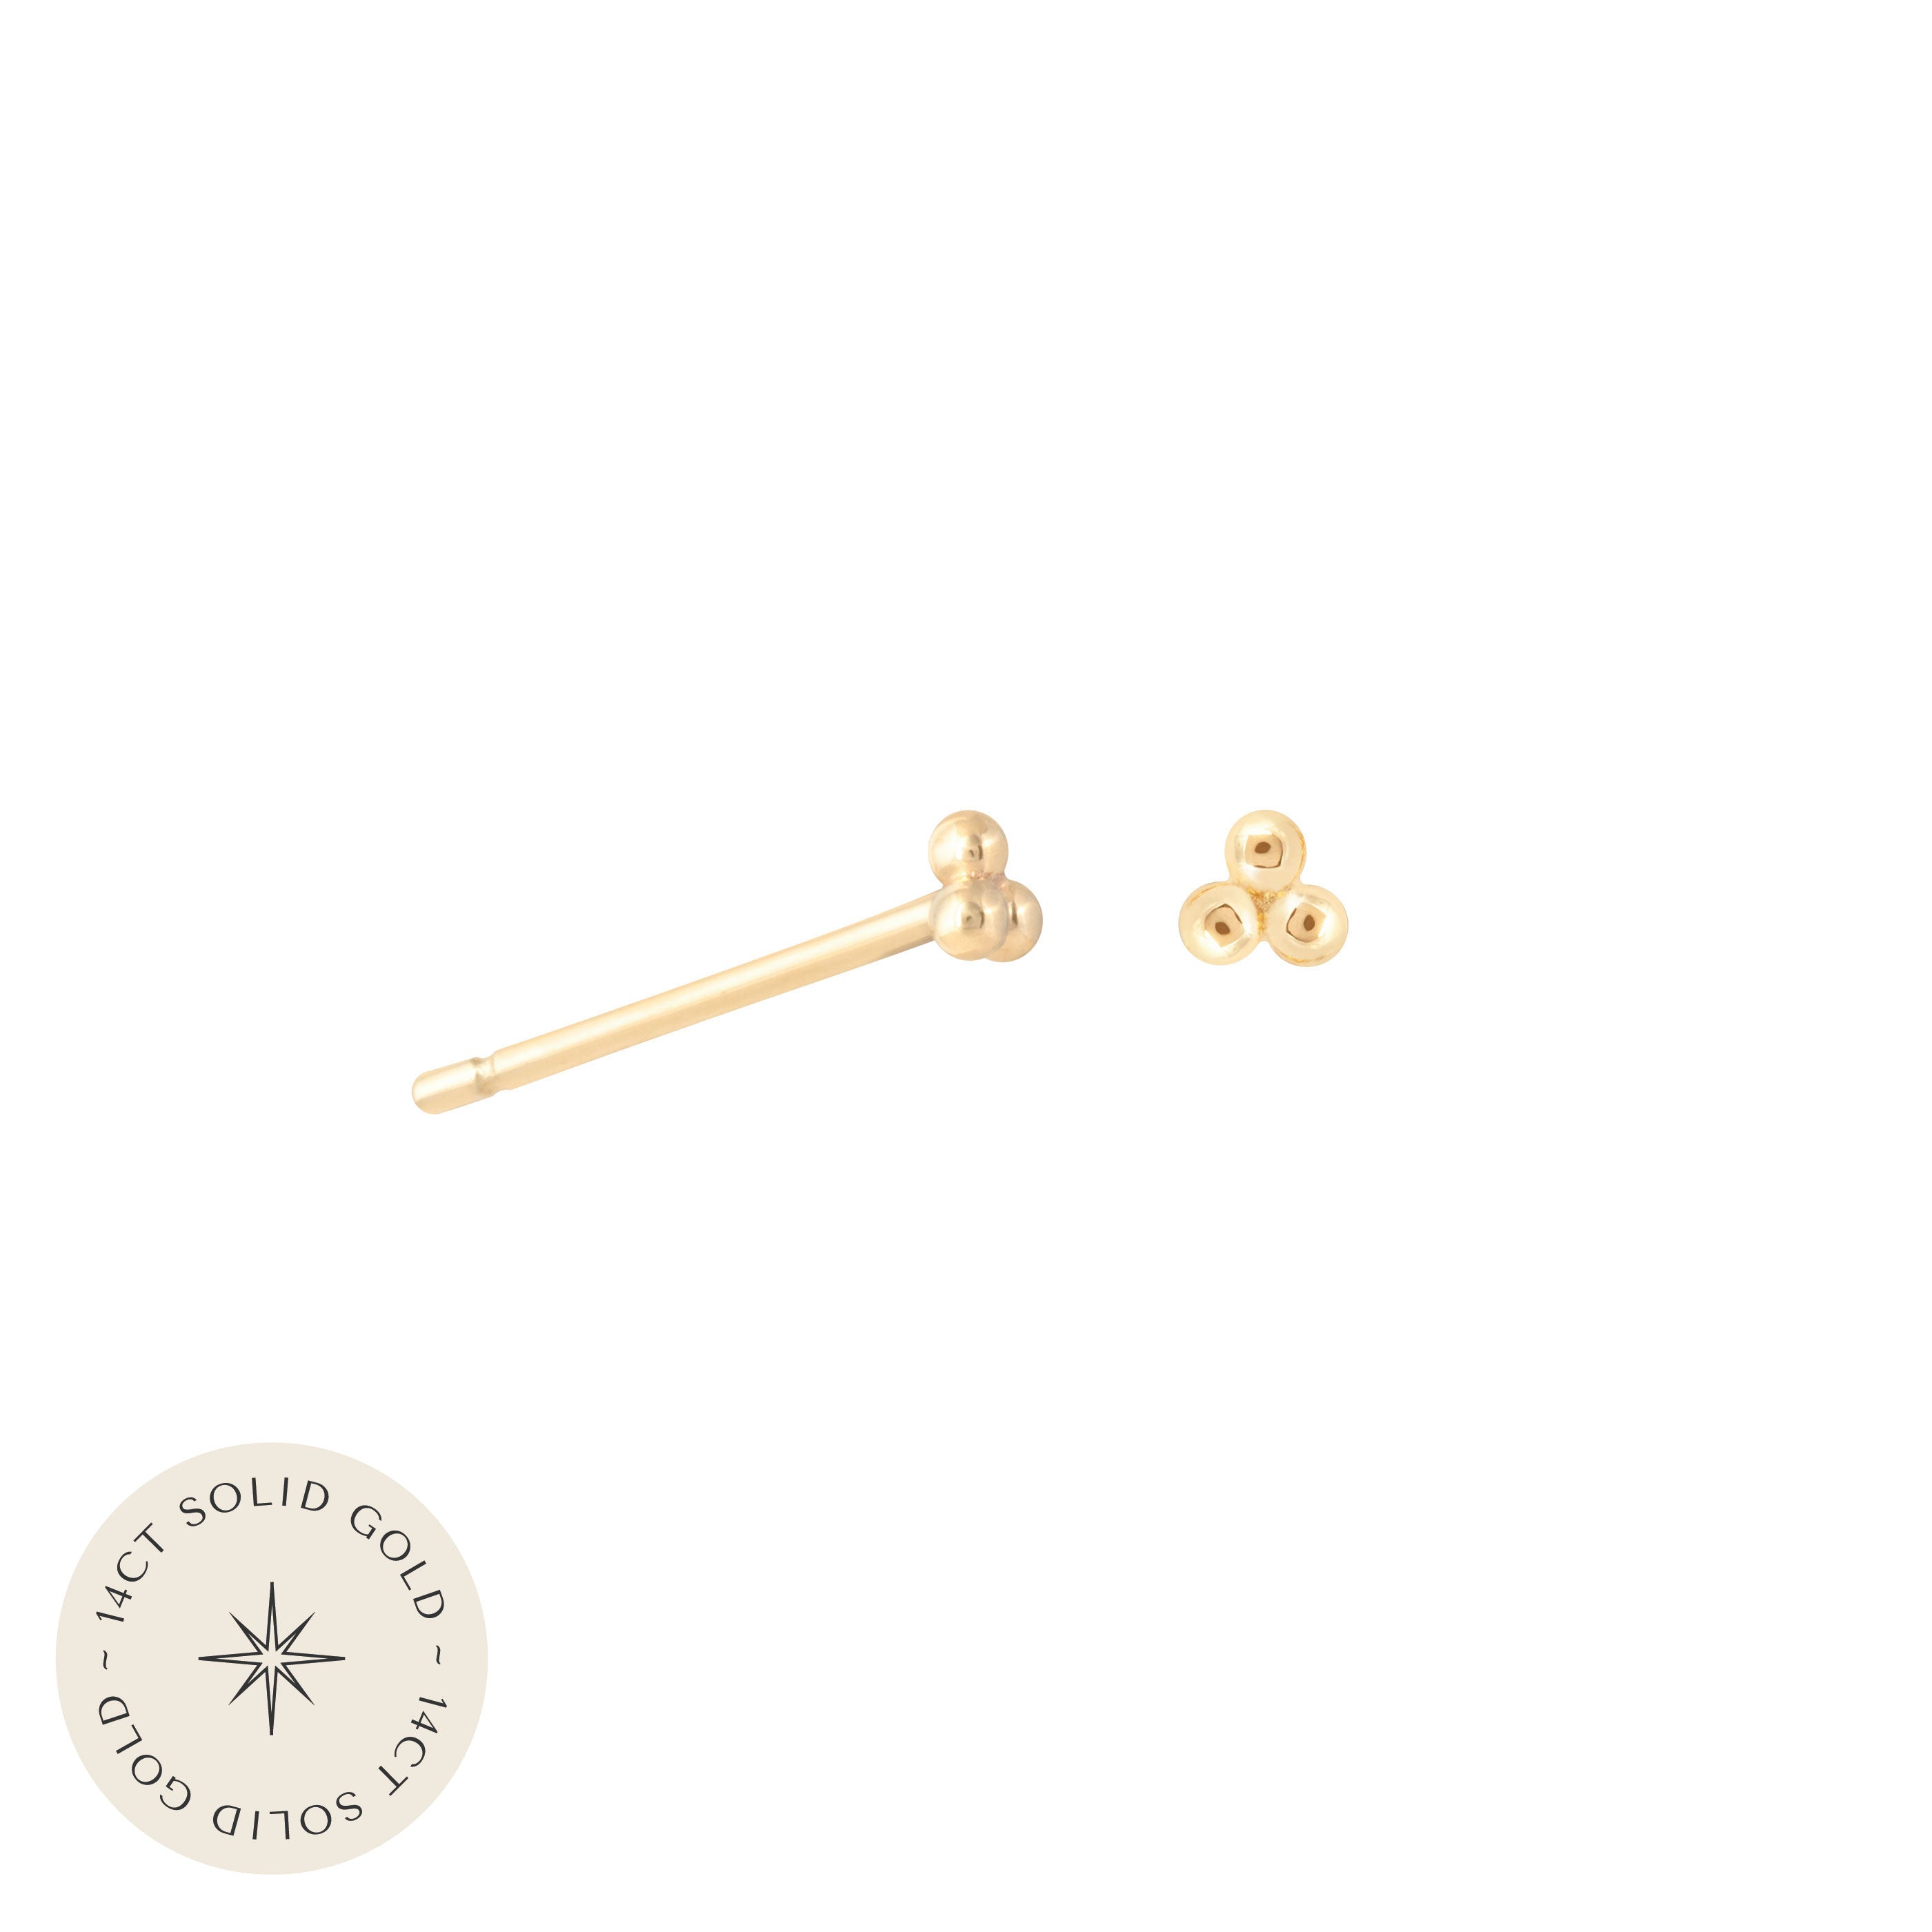 Trinity Stud Earrings in Solid Gold with 14CT Solid gold label